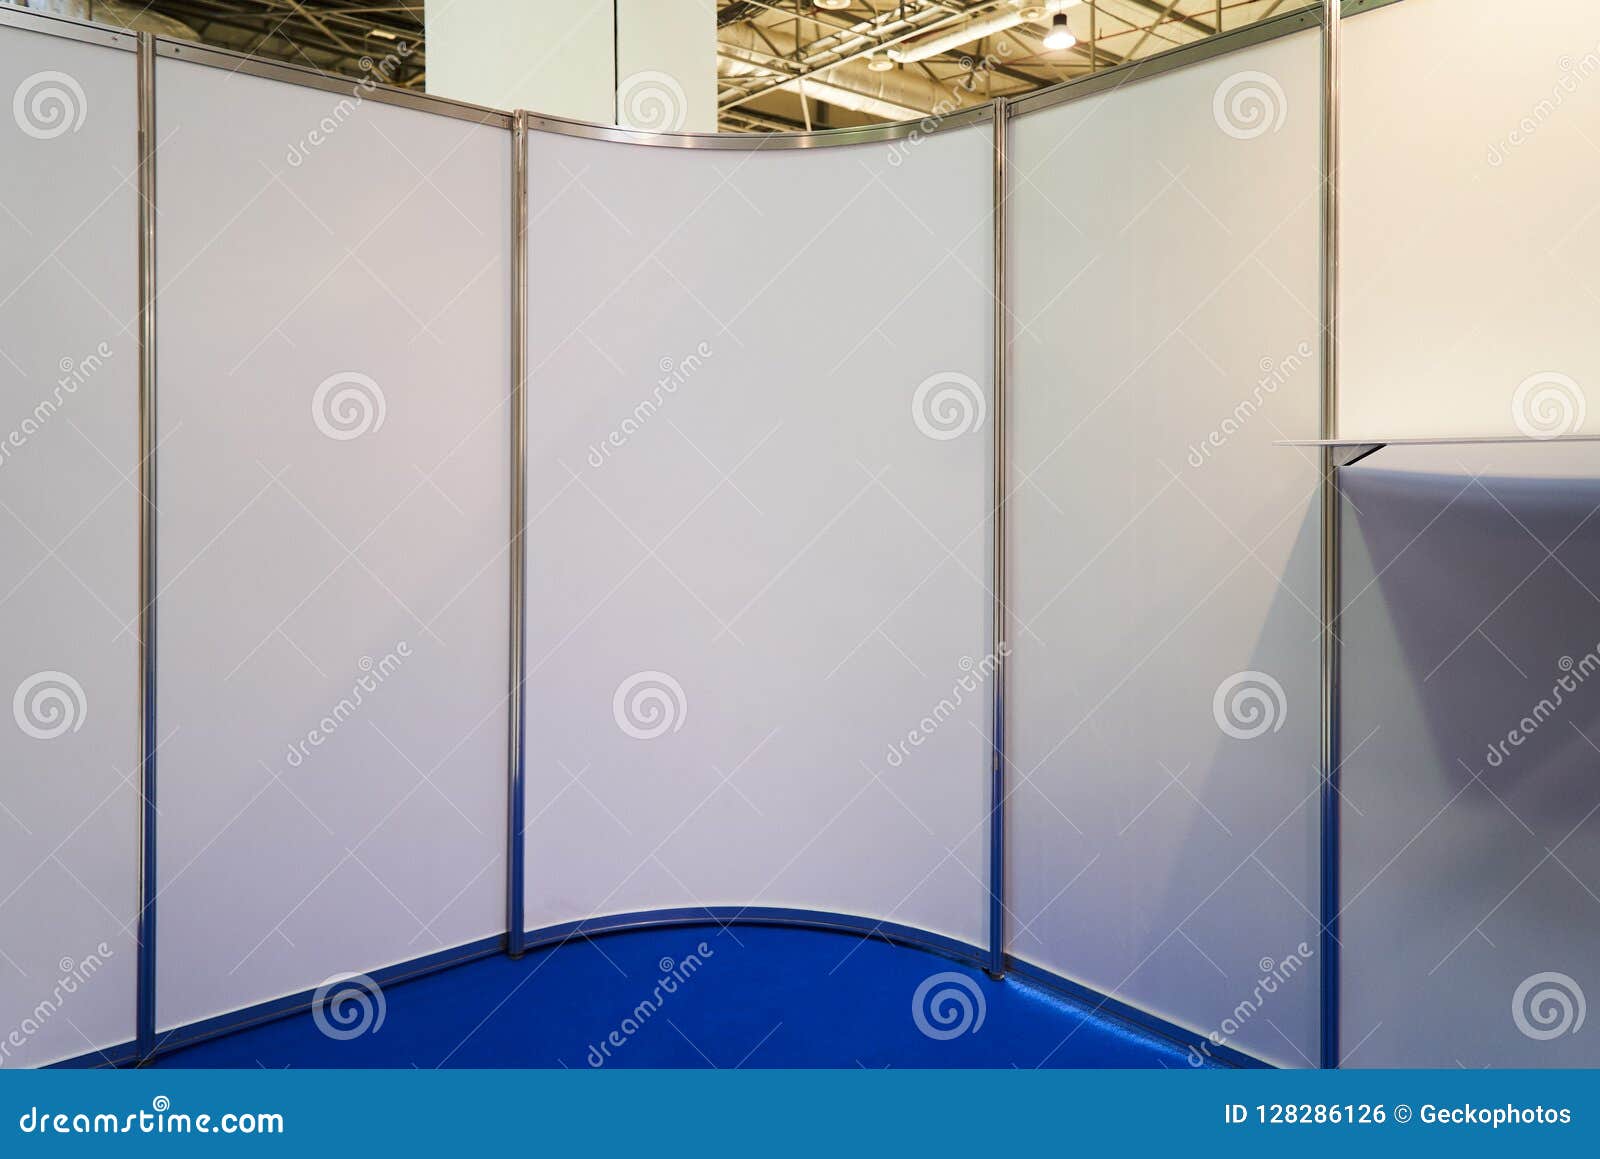 showroom plastic partitions and equipment, indoor. expo